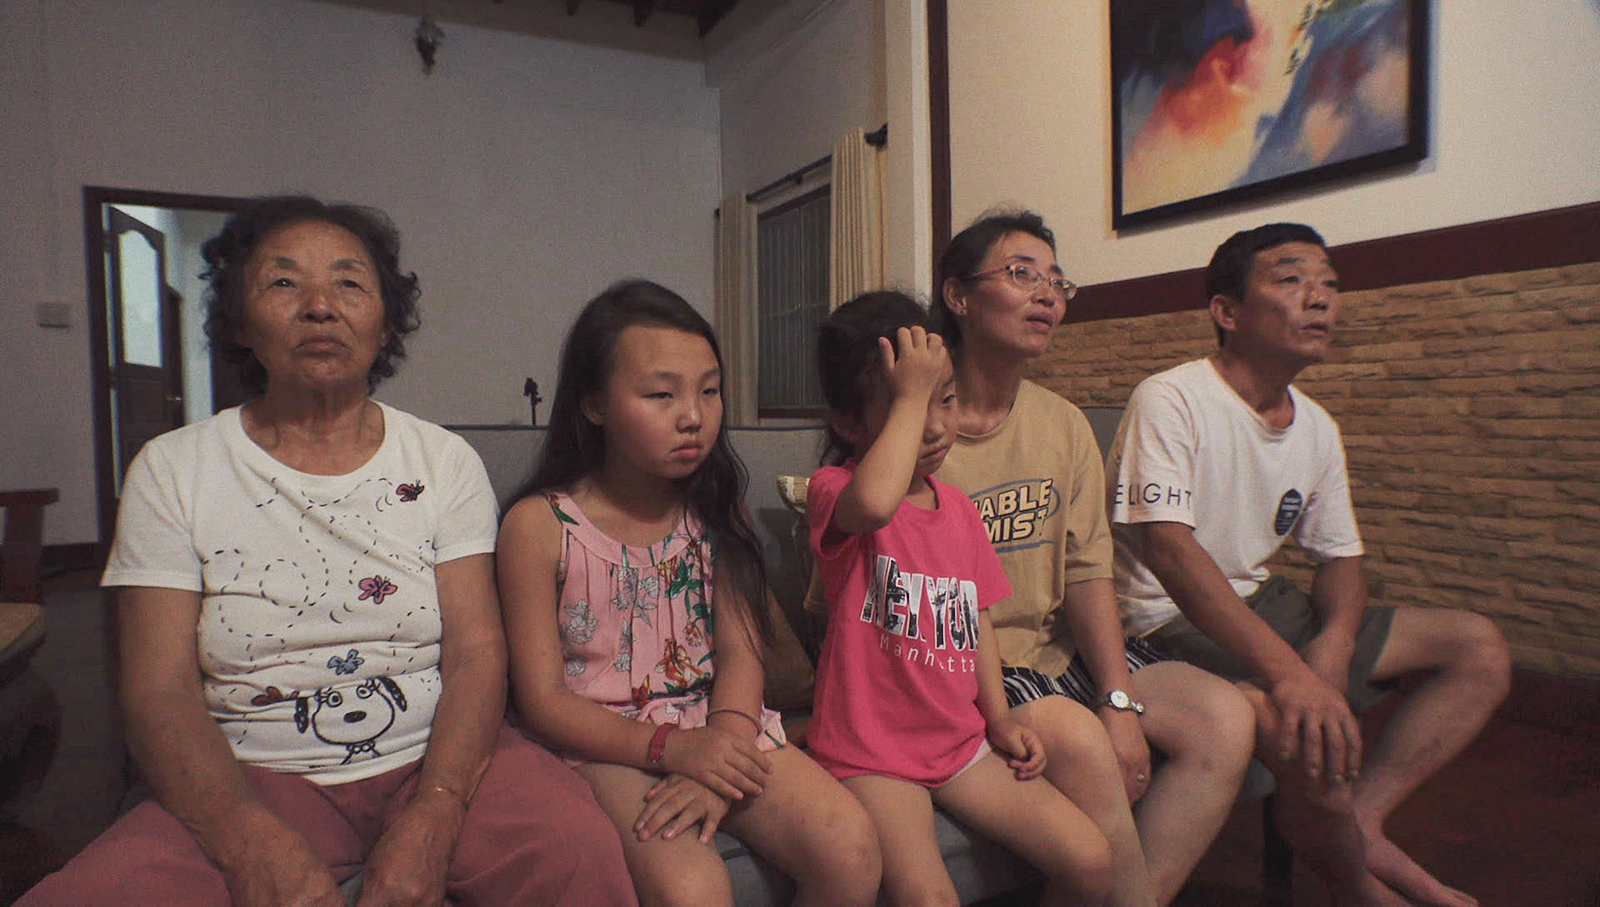 “Beyond Utopia" documents the journey of the Roh family to escape from North Korea. (Photo courtesy Beyond Utopia)